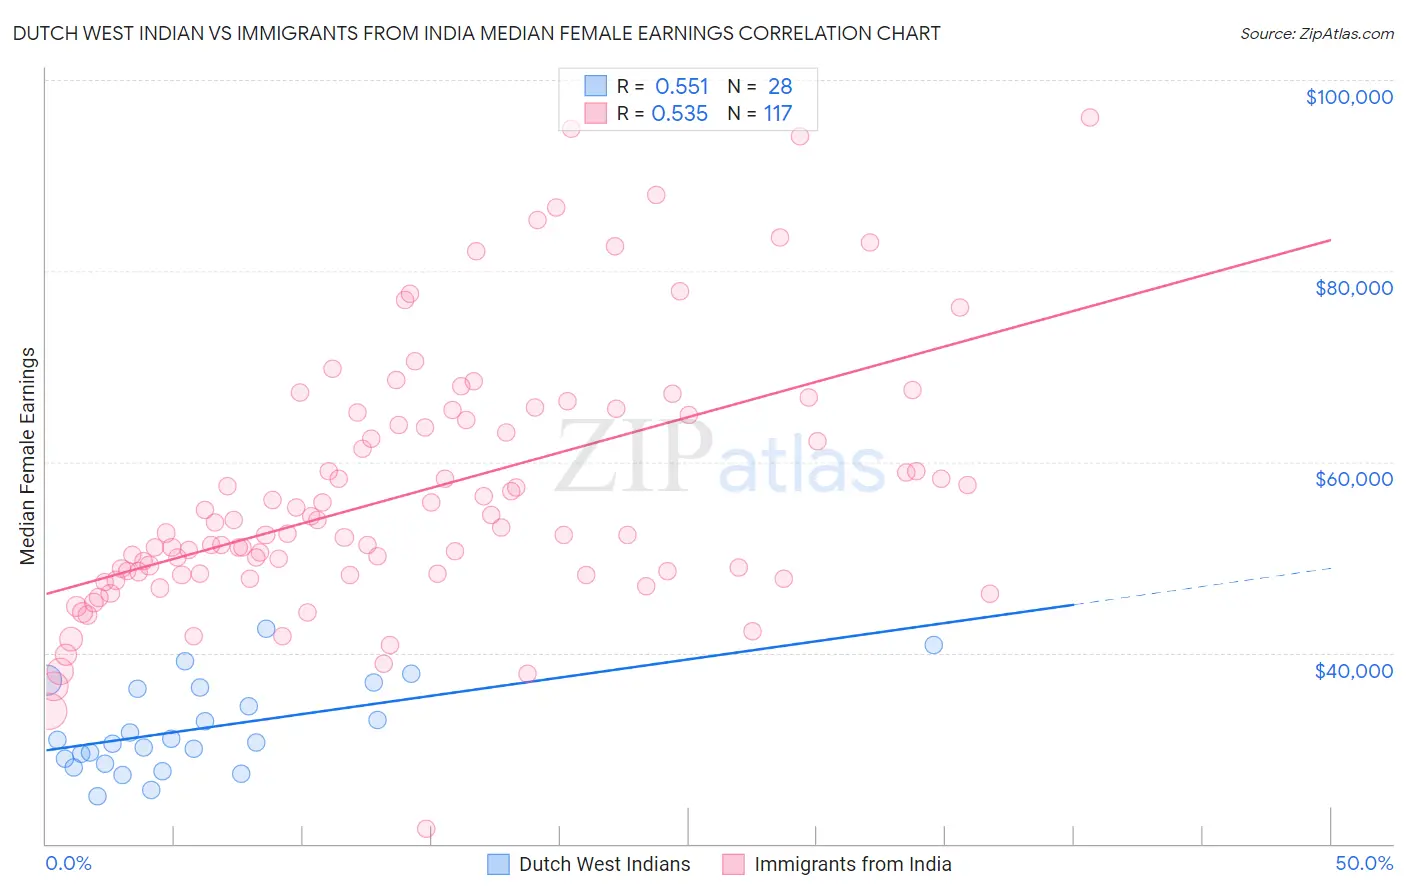 Dutch West Indian vs Immigrants from India Median Female Earnings